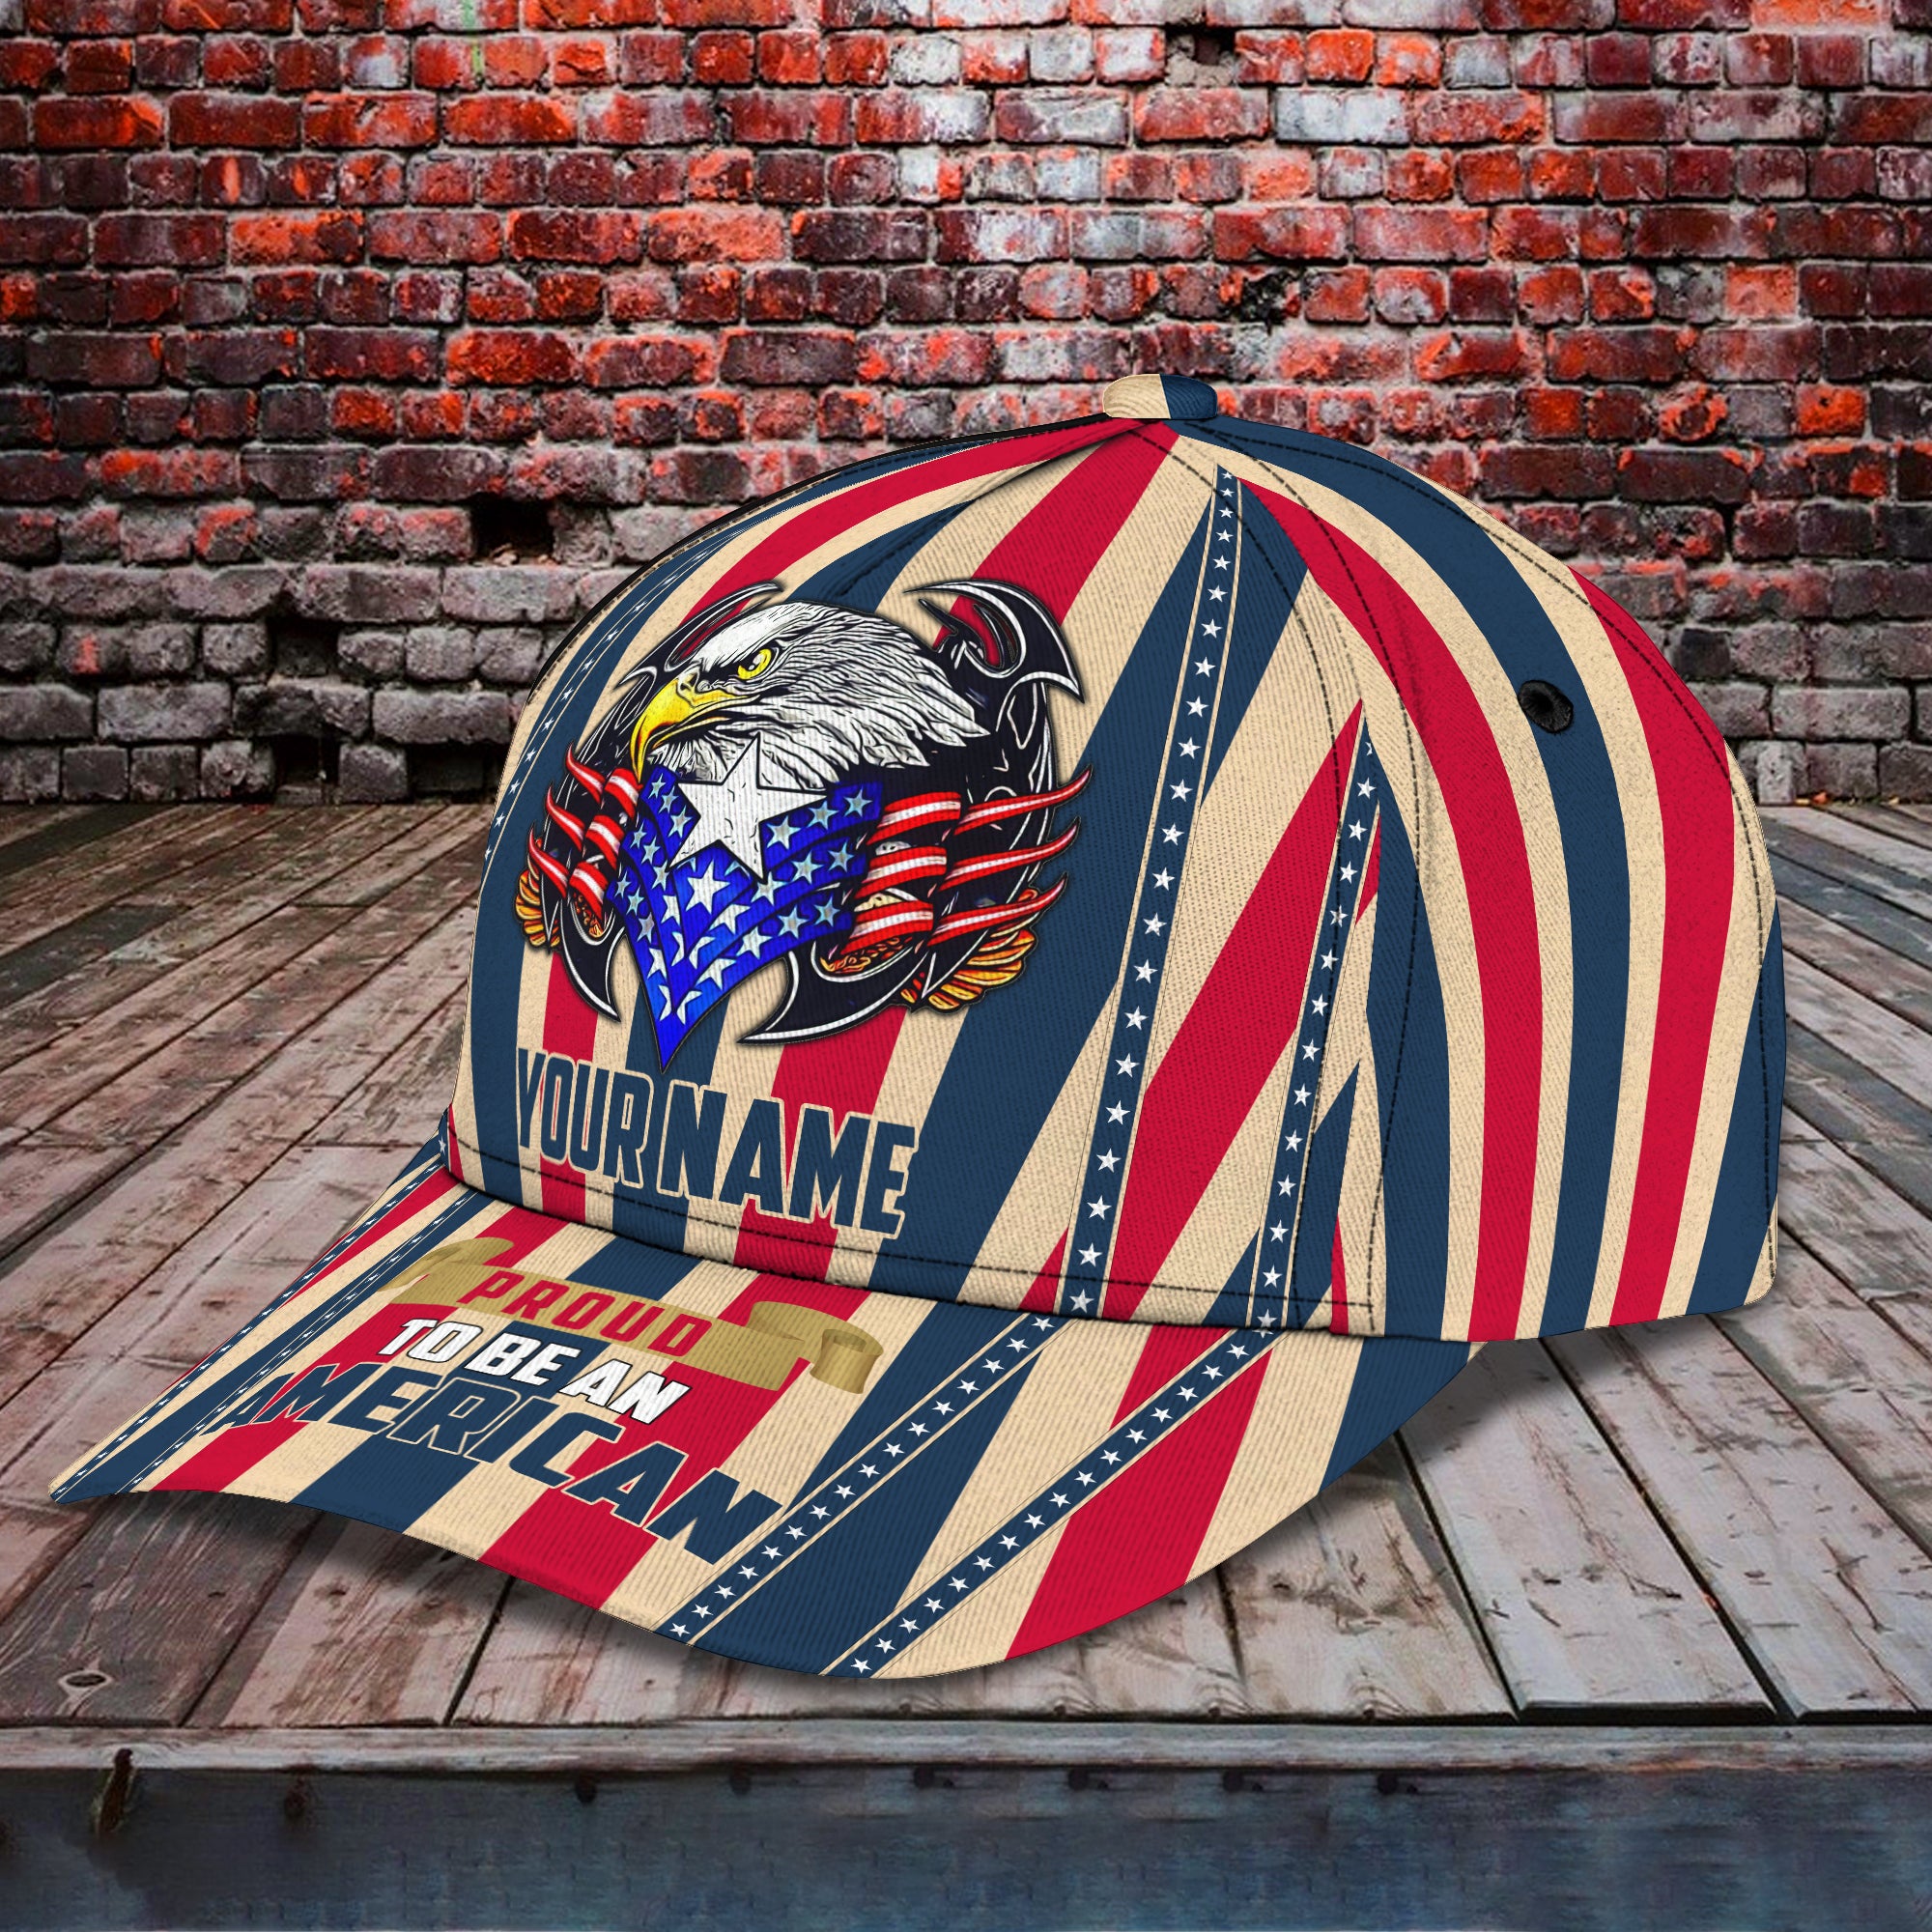 Pround To Be An American - Personalized Name Cap - Urt96